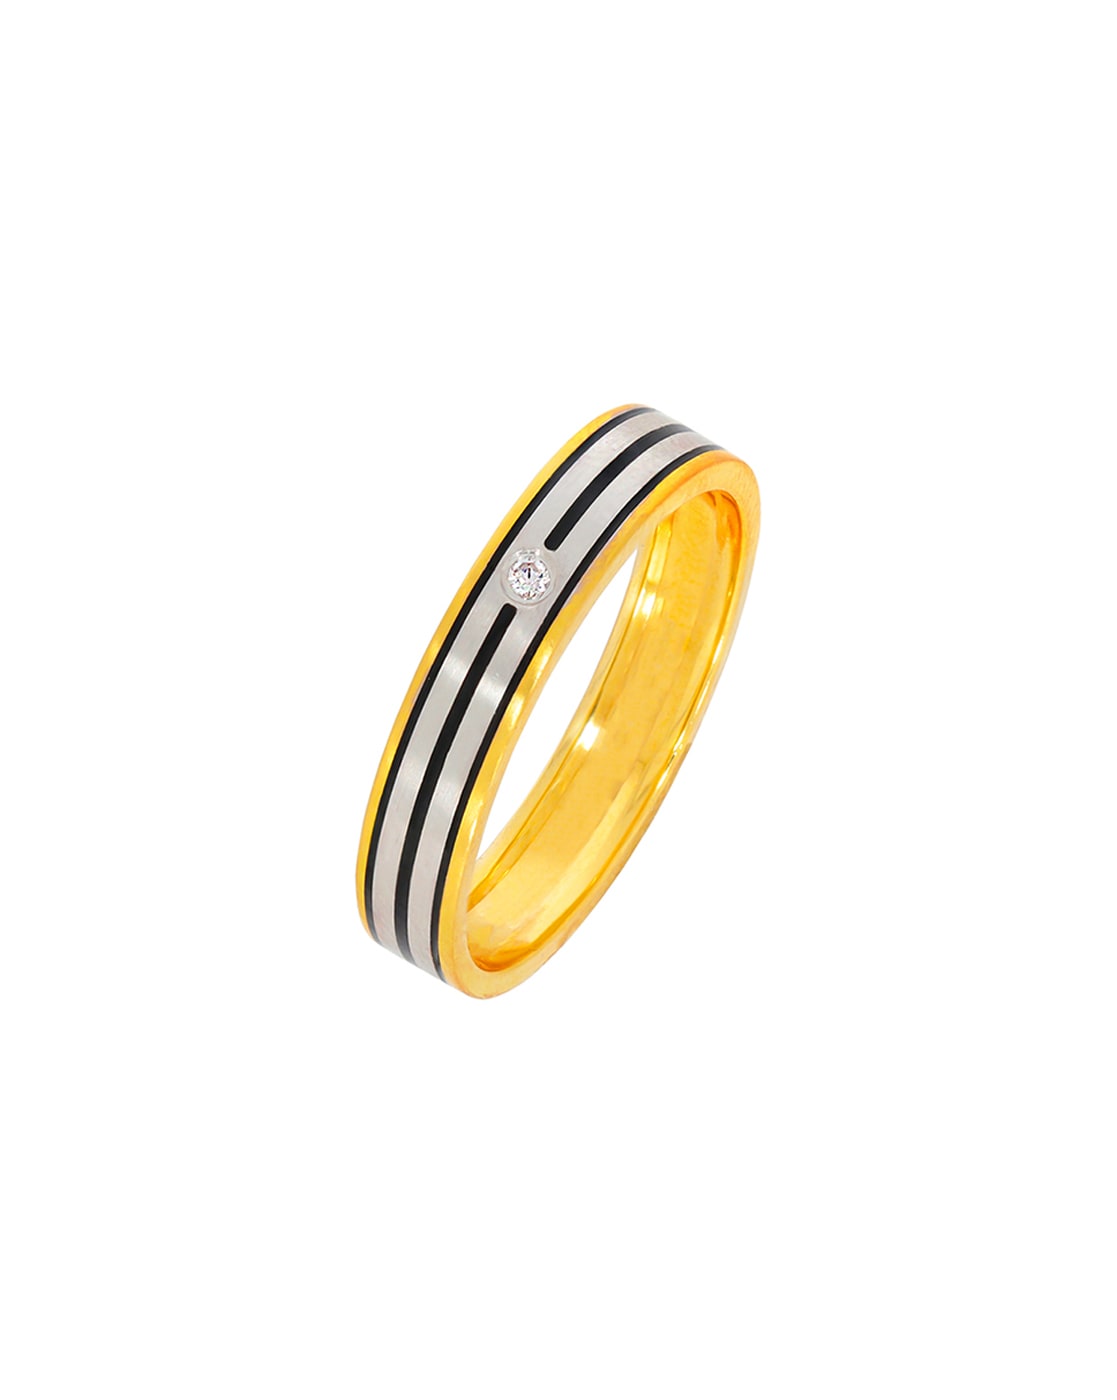 TwoBirch Men's Wedding Rings - 0.25 Ct. Black Stone Wide Channel Set Men's  Ring with Open End Design in Yellow Gold